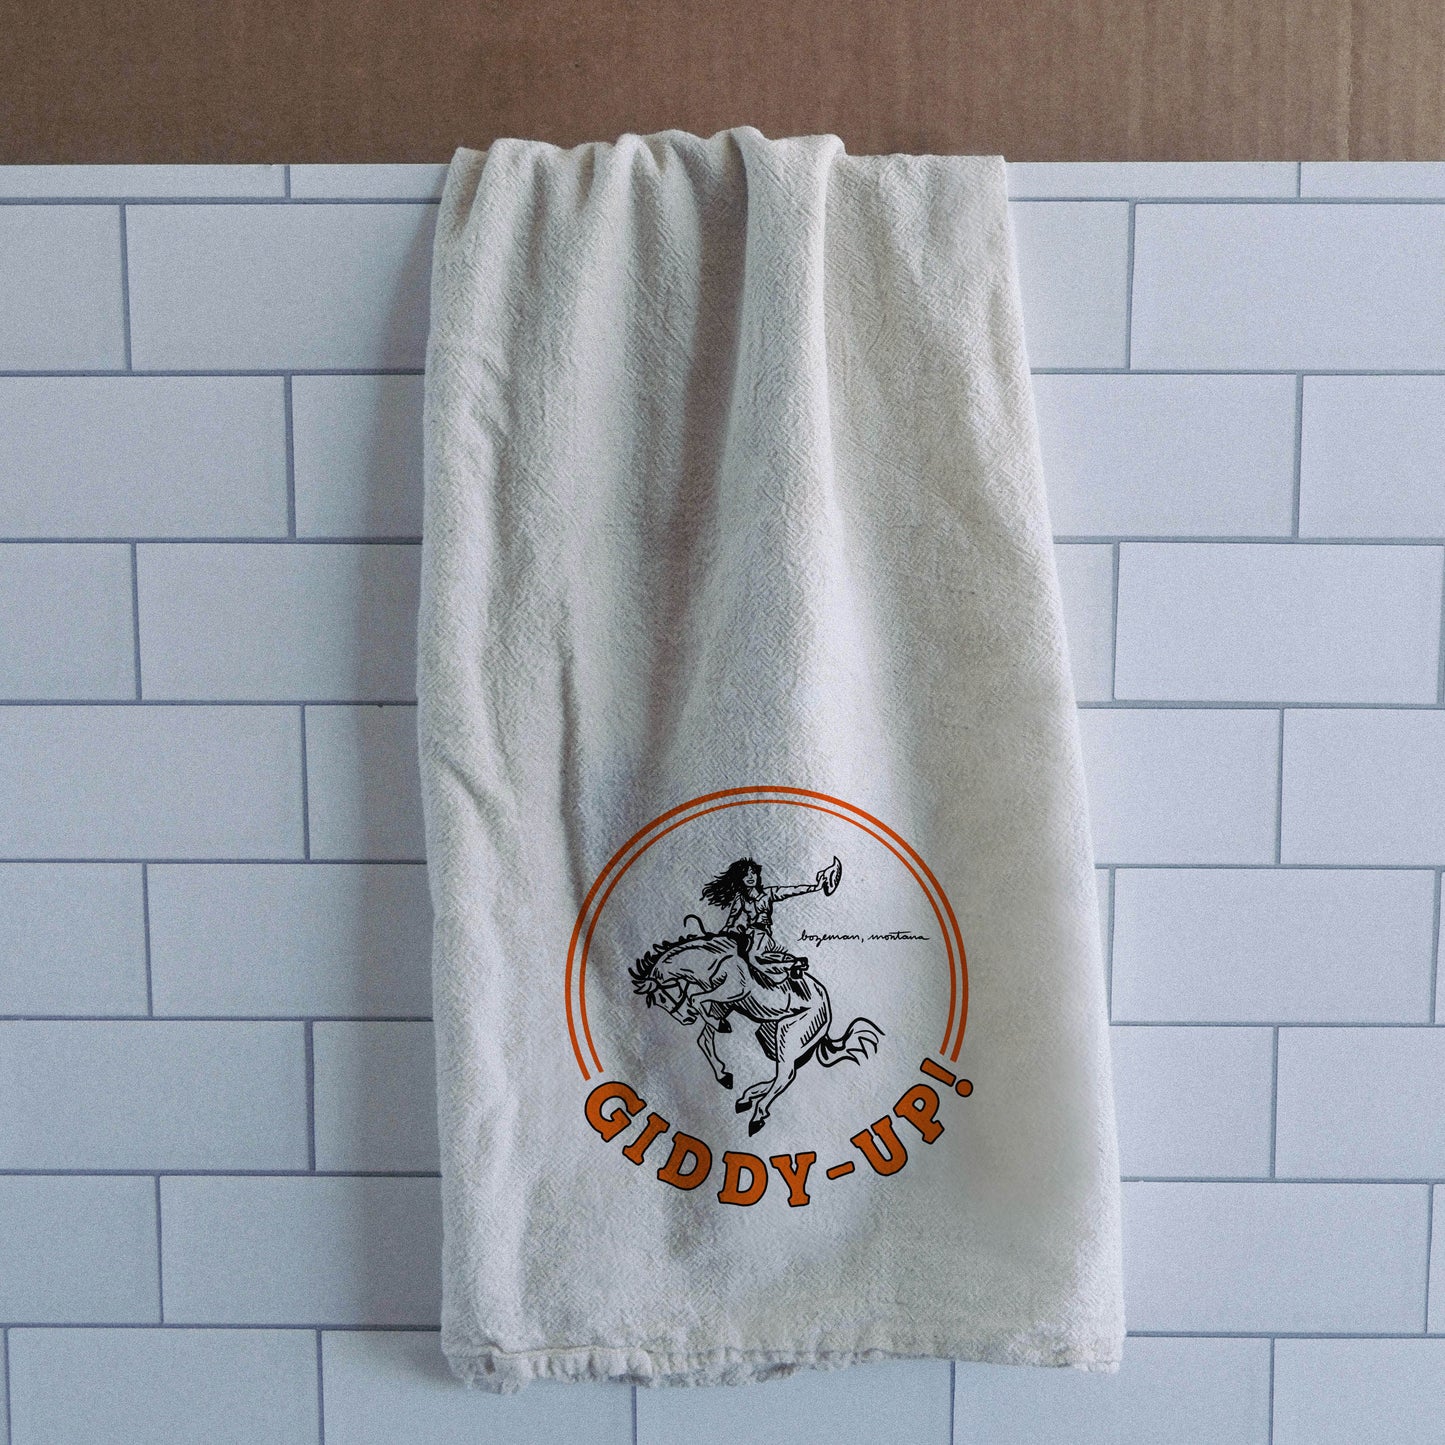 Giddy Up Dish Towel - Intrigue Ink Visit Bozeman, Unique Shopping Boutique in Montana, Work from Home Clothes for Women